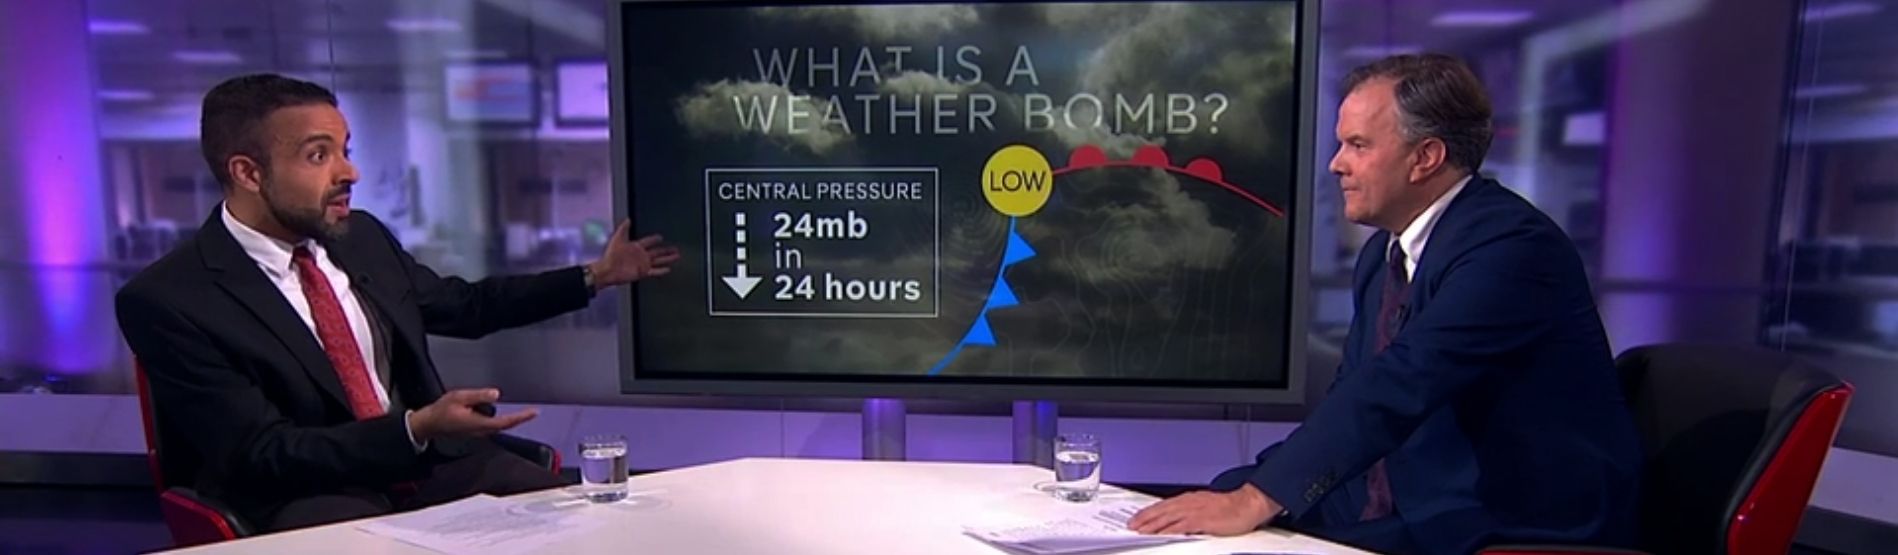 Liam Dutton presenting a weather segment on Channel 4 News.